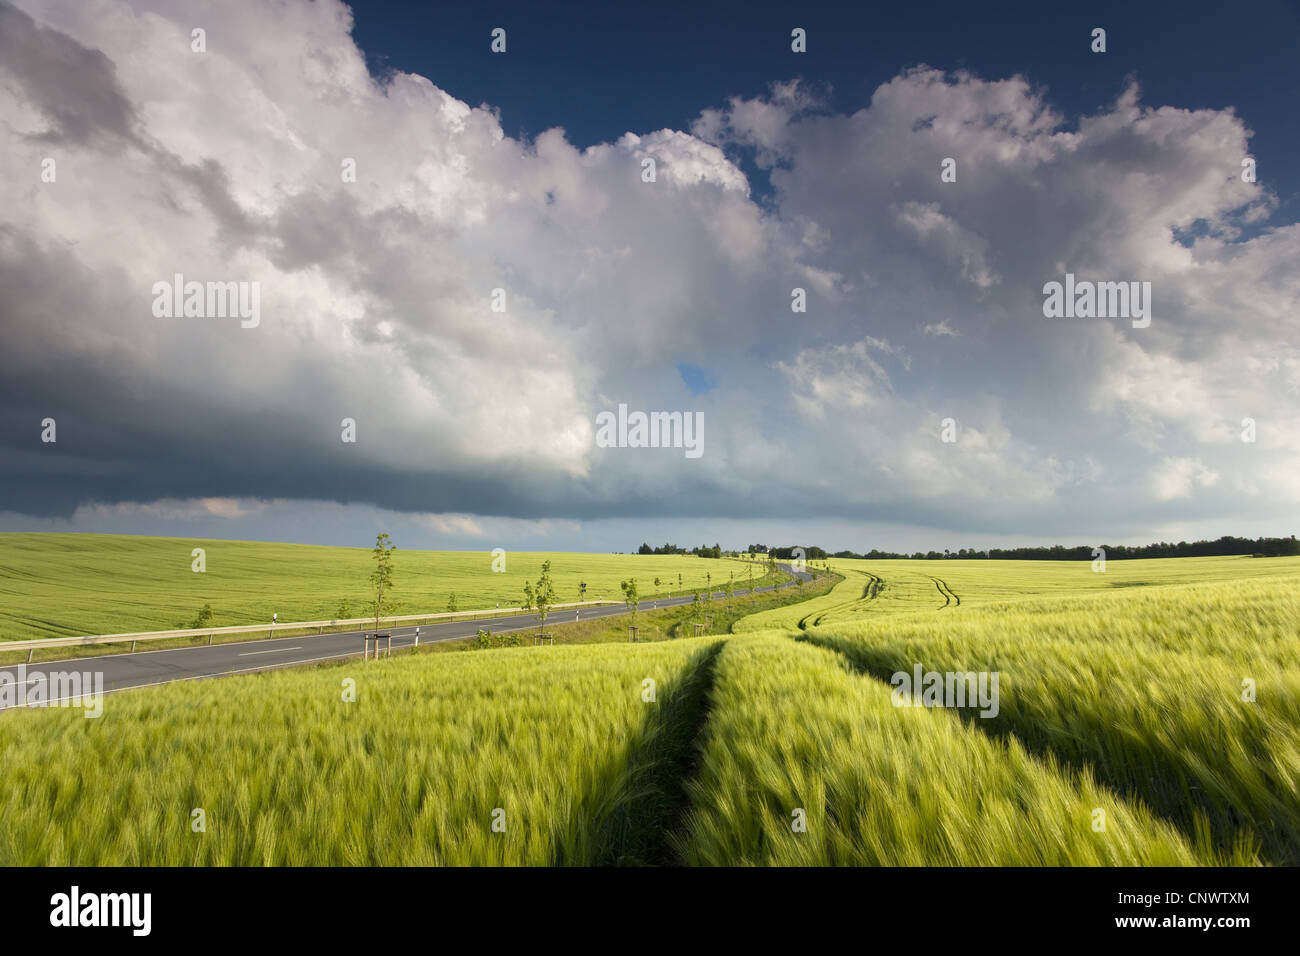 cornfield at a country road with rain clouds, Germany, Saxony, Vogtlaendische Schweiz Stock Photo